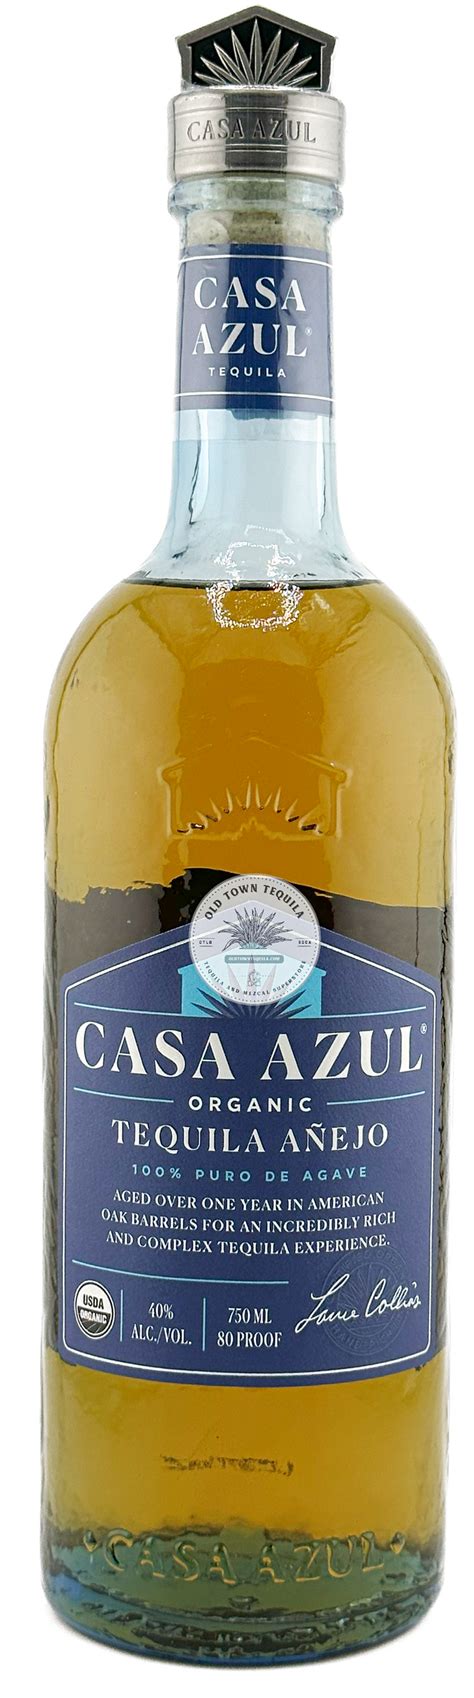 Casa Azul Organic Tequila Anejo Old Town Tequila